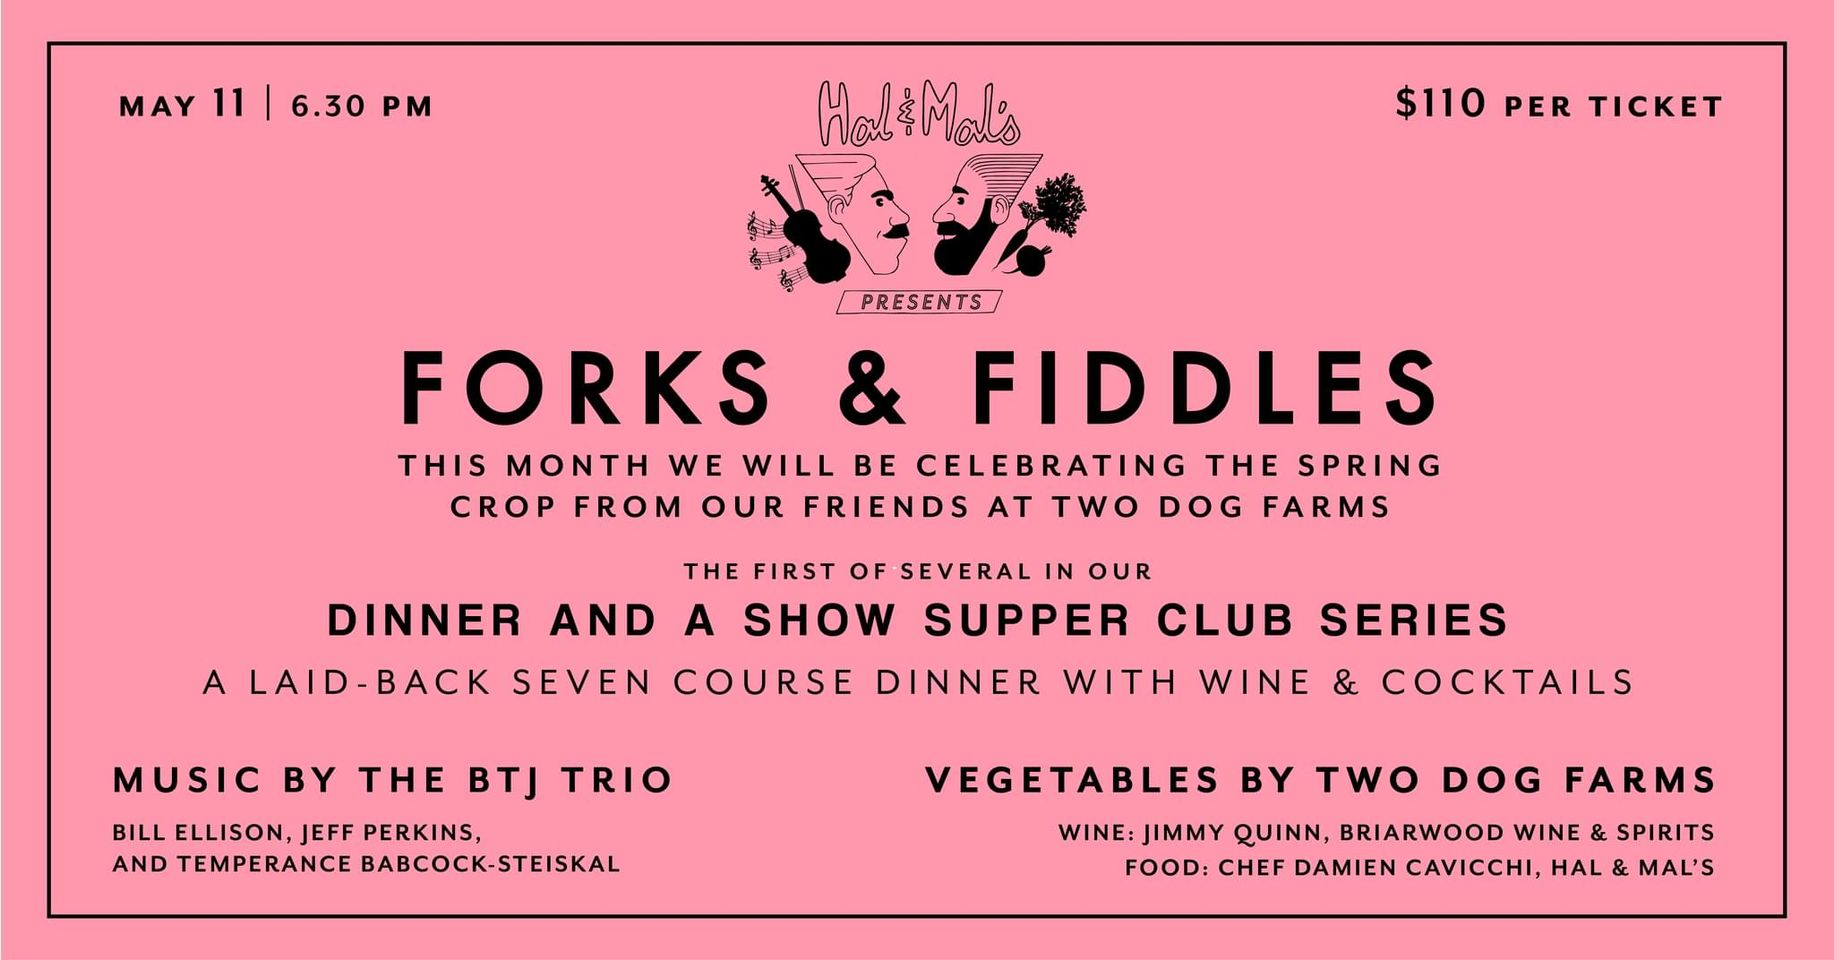 Forks & Fiddles – Dinner and a Show Supper Club Series